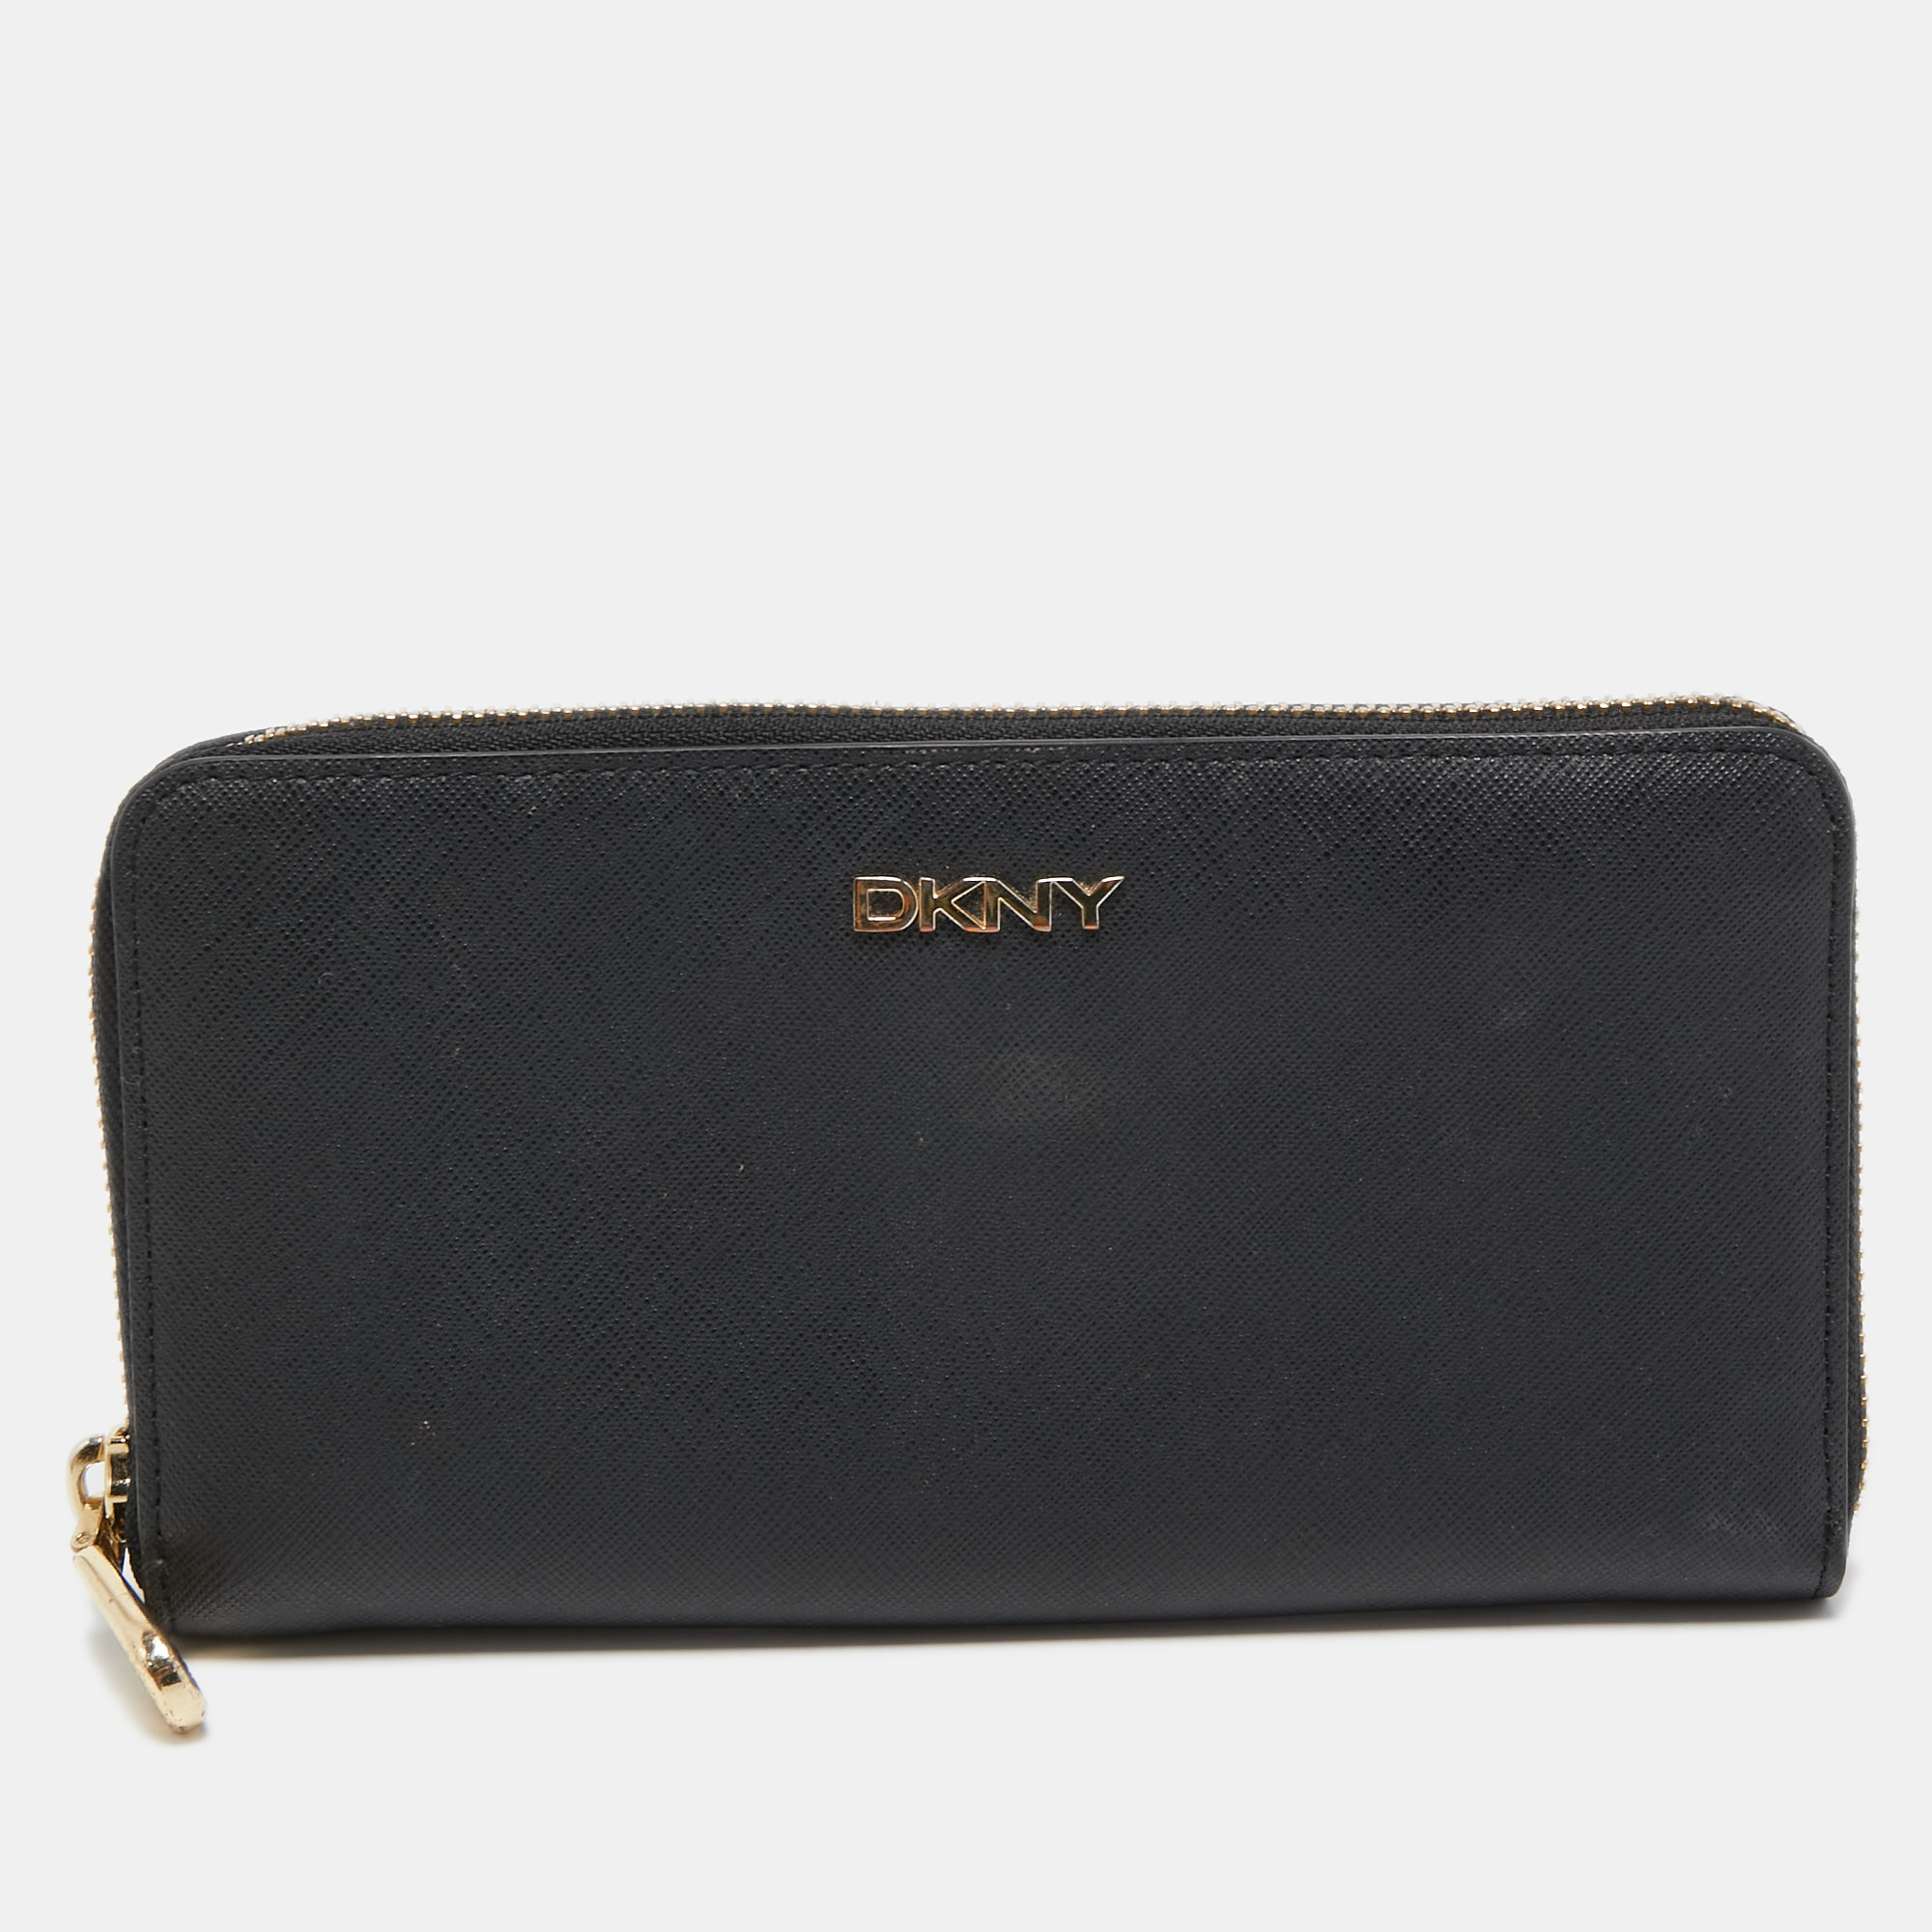 Pre-owned Dkny Black Leather Bryant Park Zip Around Wallet